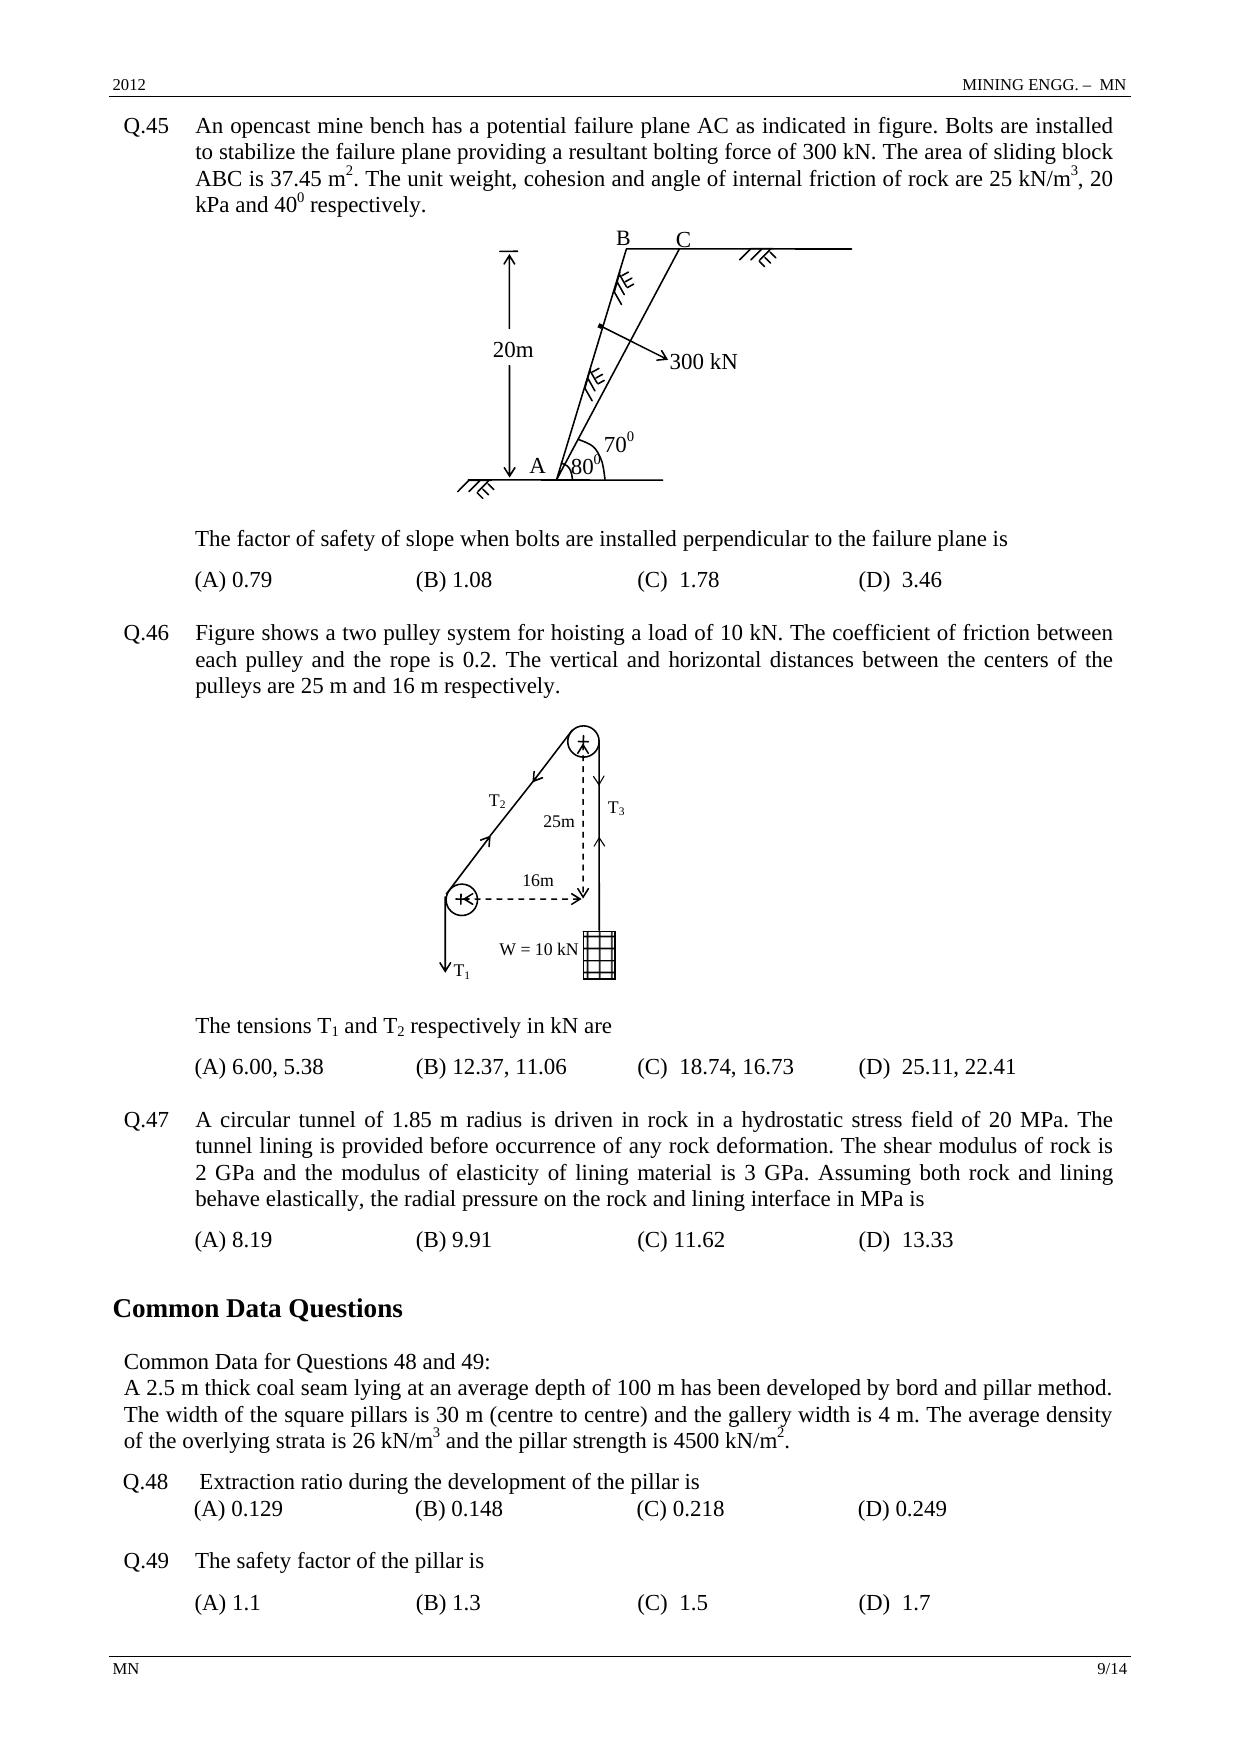 GATE 2012 Mining Engineering (MN) Question Paper with Answer Key - Page 9